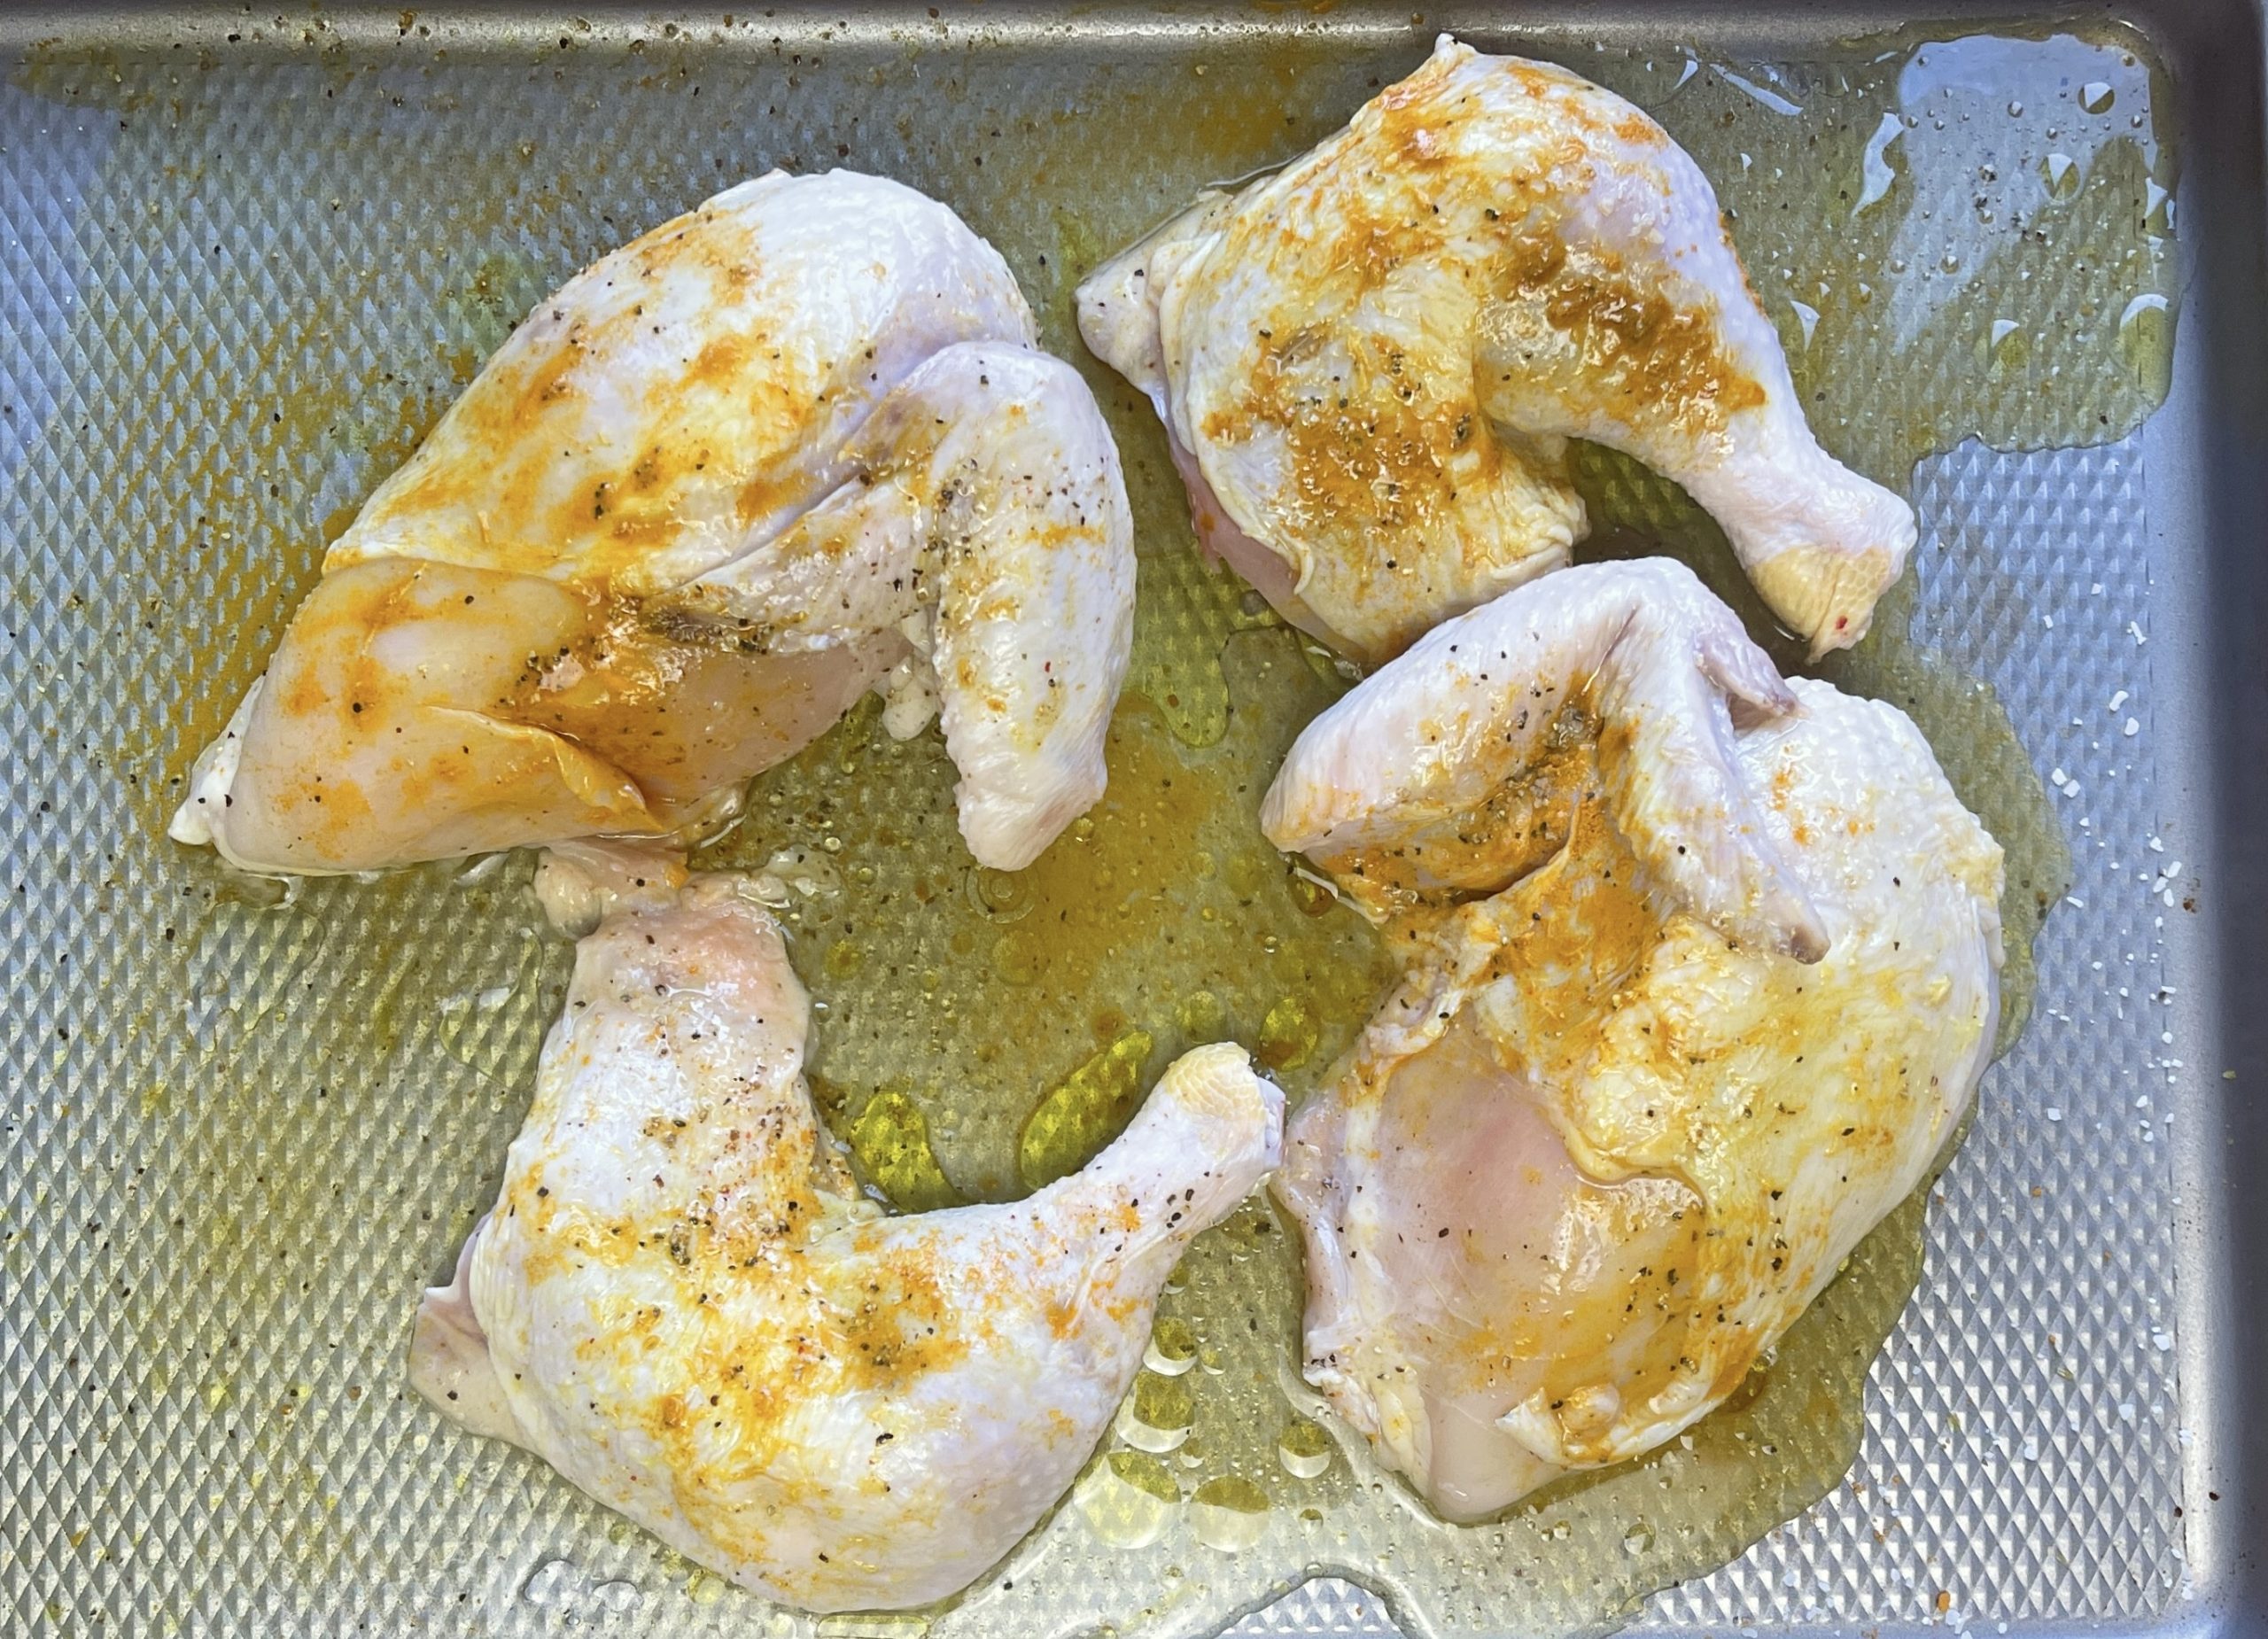 place chicken pieces on a rimmed baking sheet and coat chicken with turmeric, olive oil, salt, and pepper. Pour vinegar over chicken